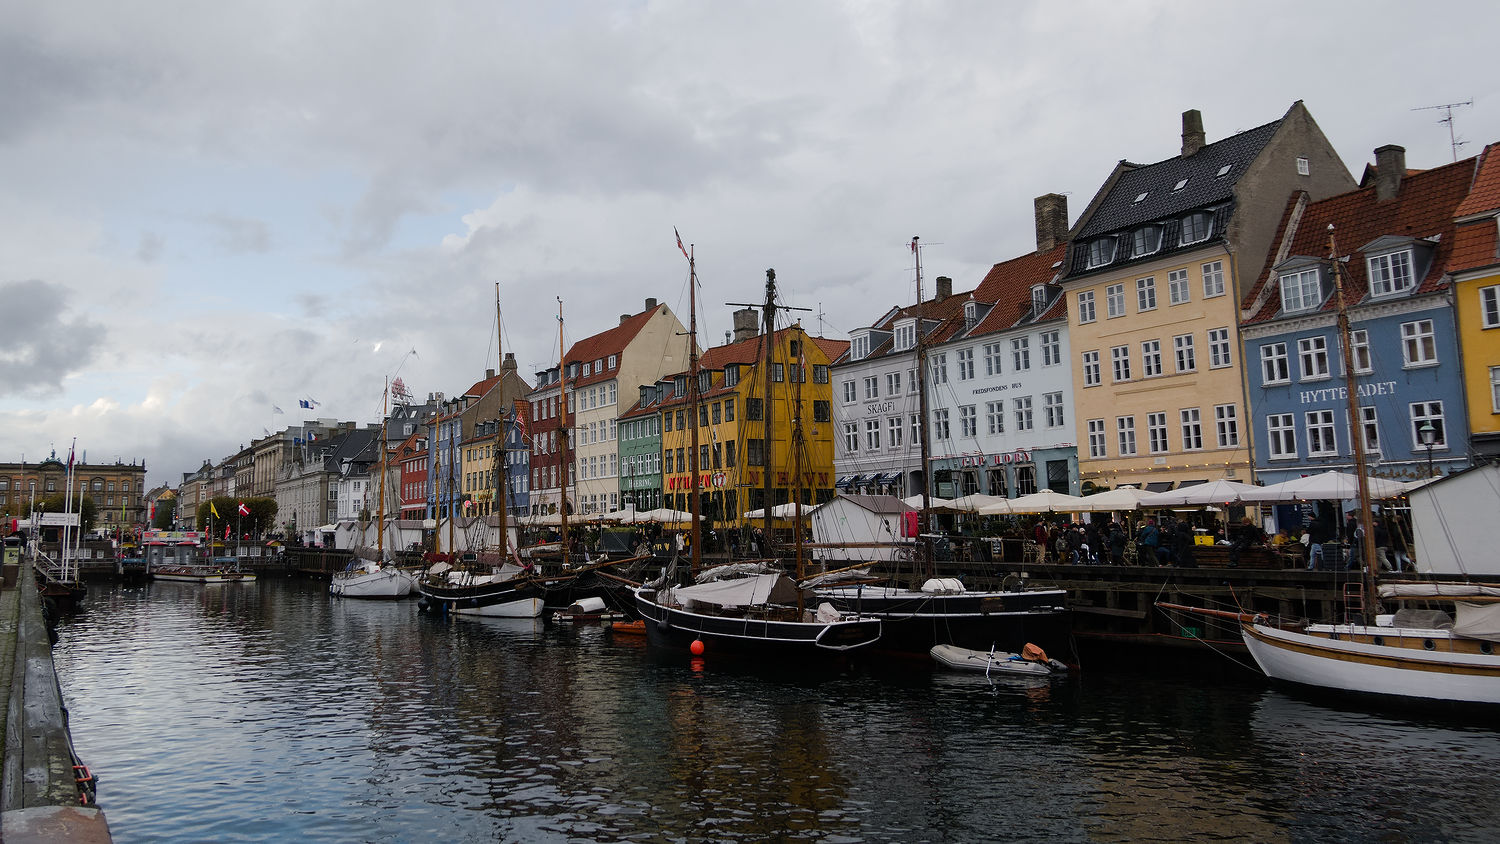 Photo of Nyhavn, Copenhagen: sailboats docked, colourful houses in the background